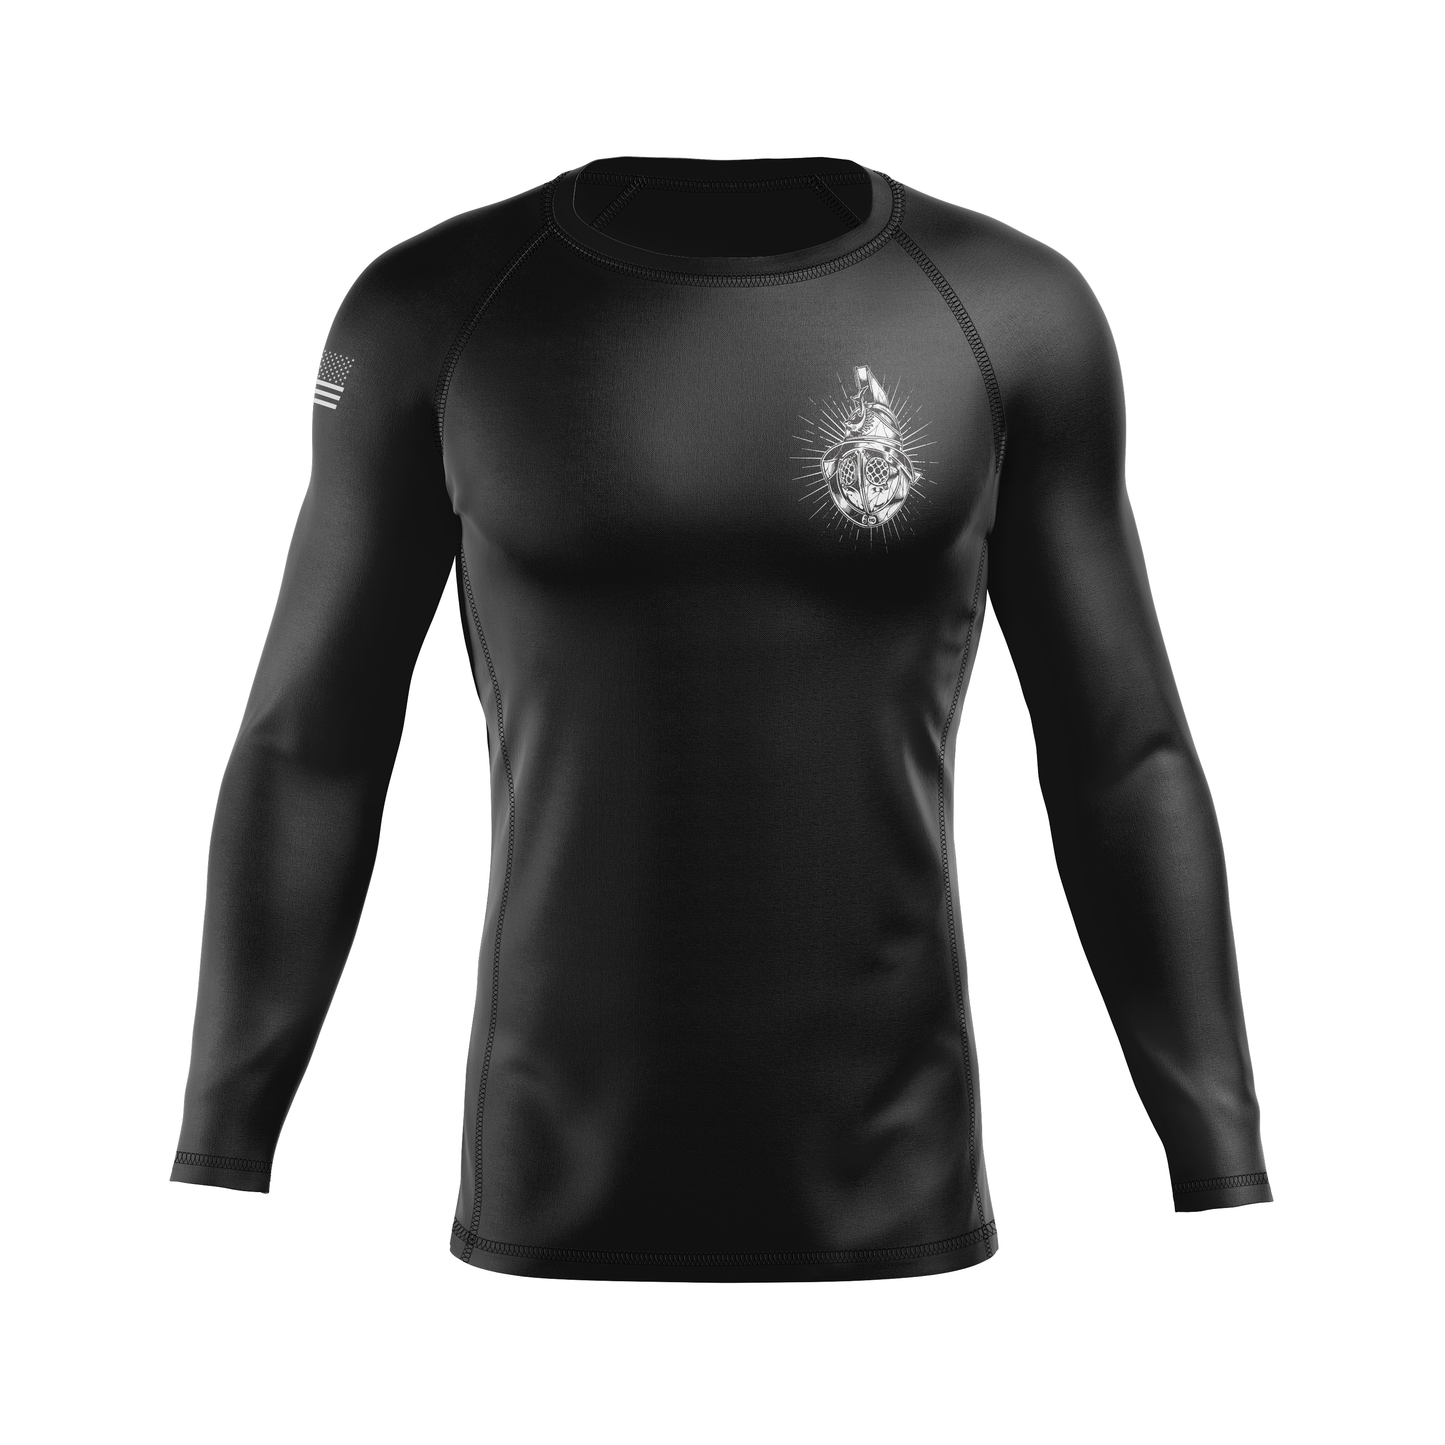 Deeds of Arms men's rash guard Deeds of Arms, white on black